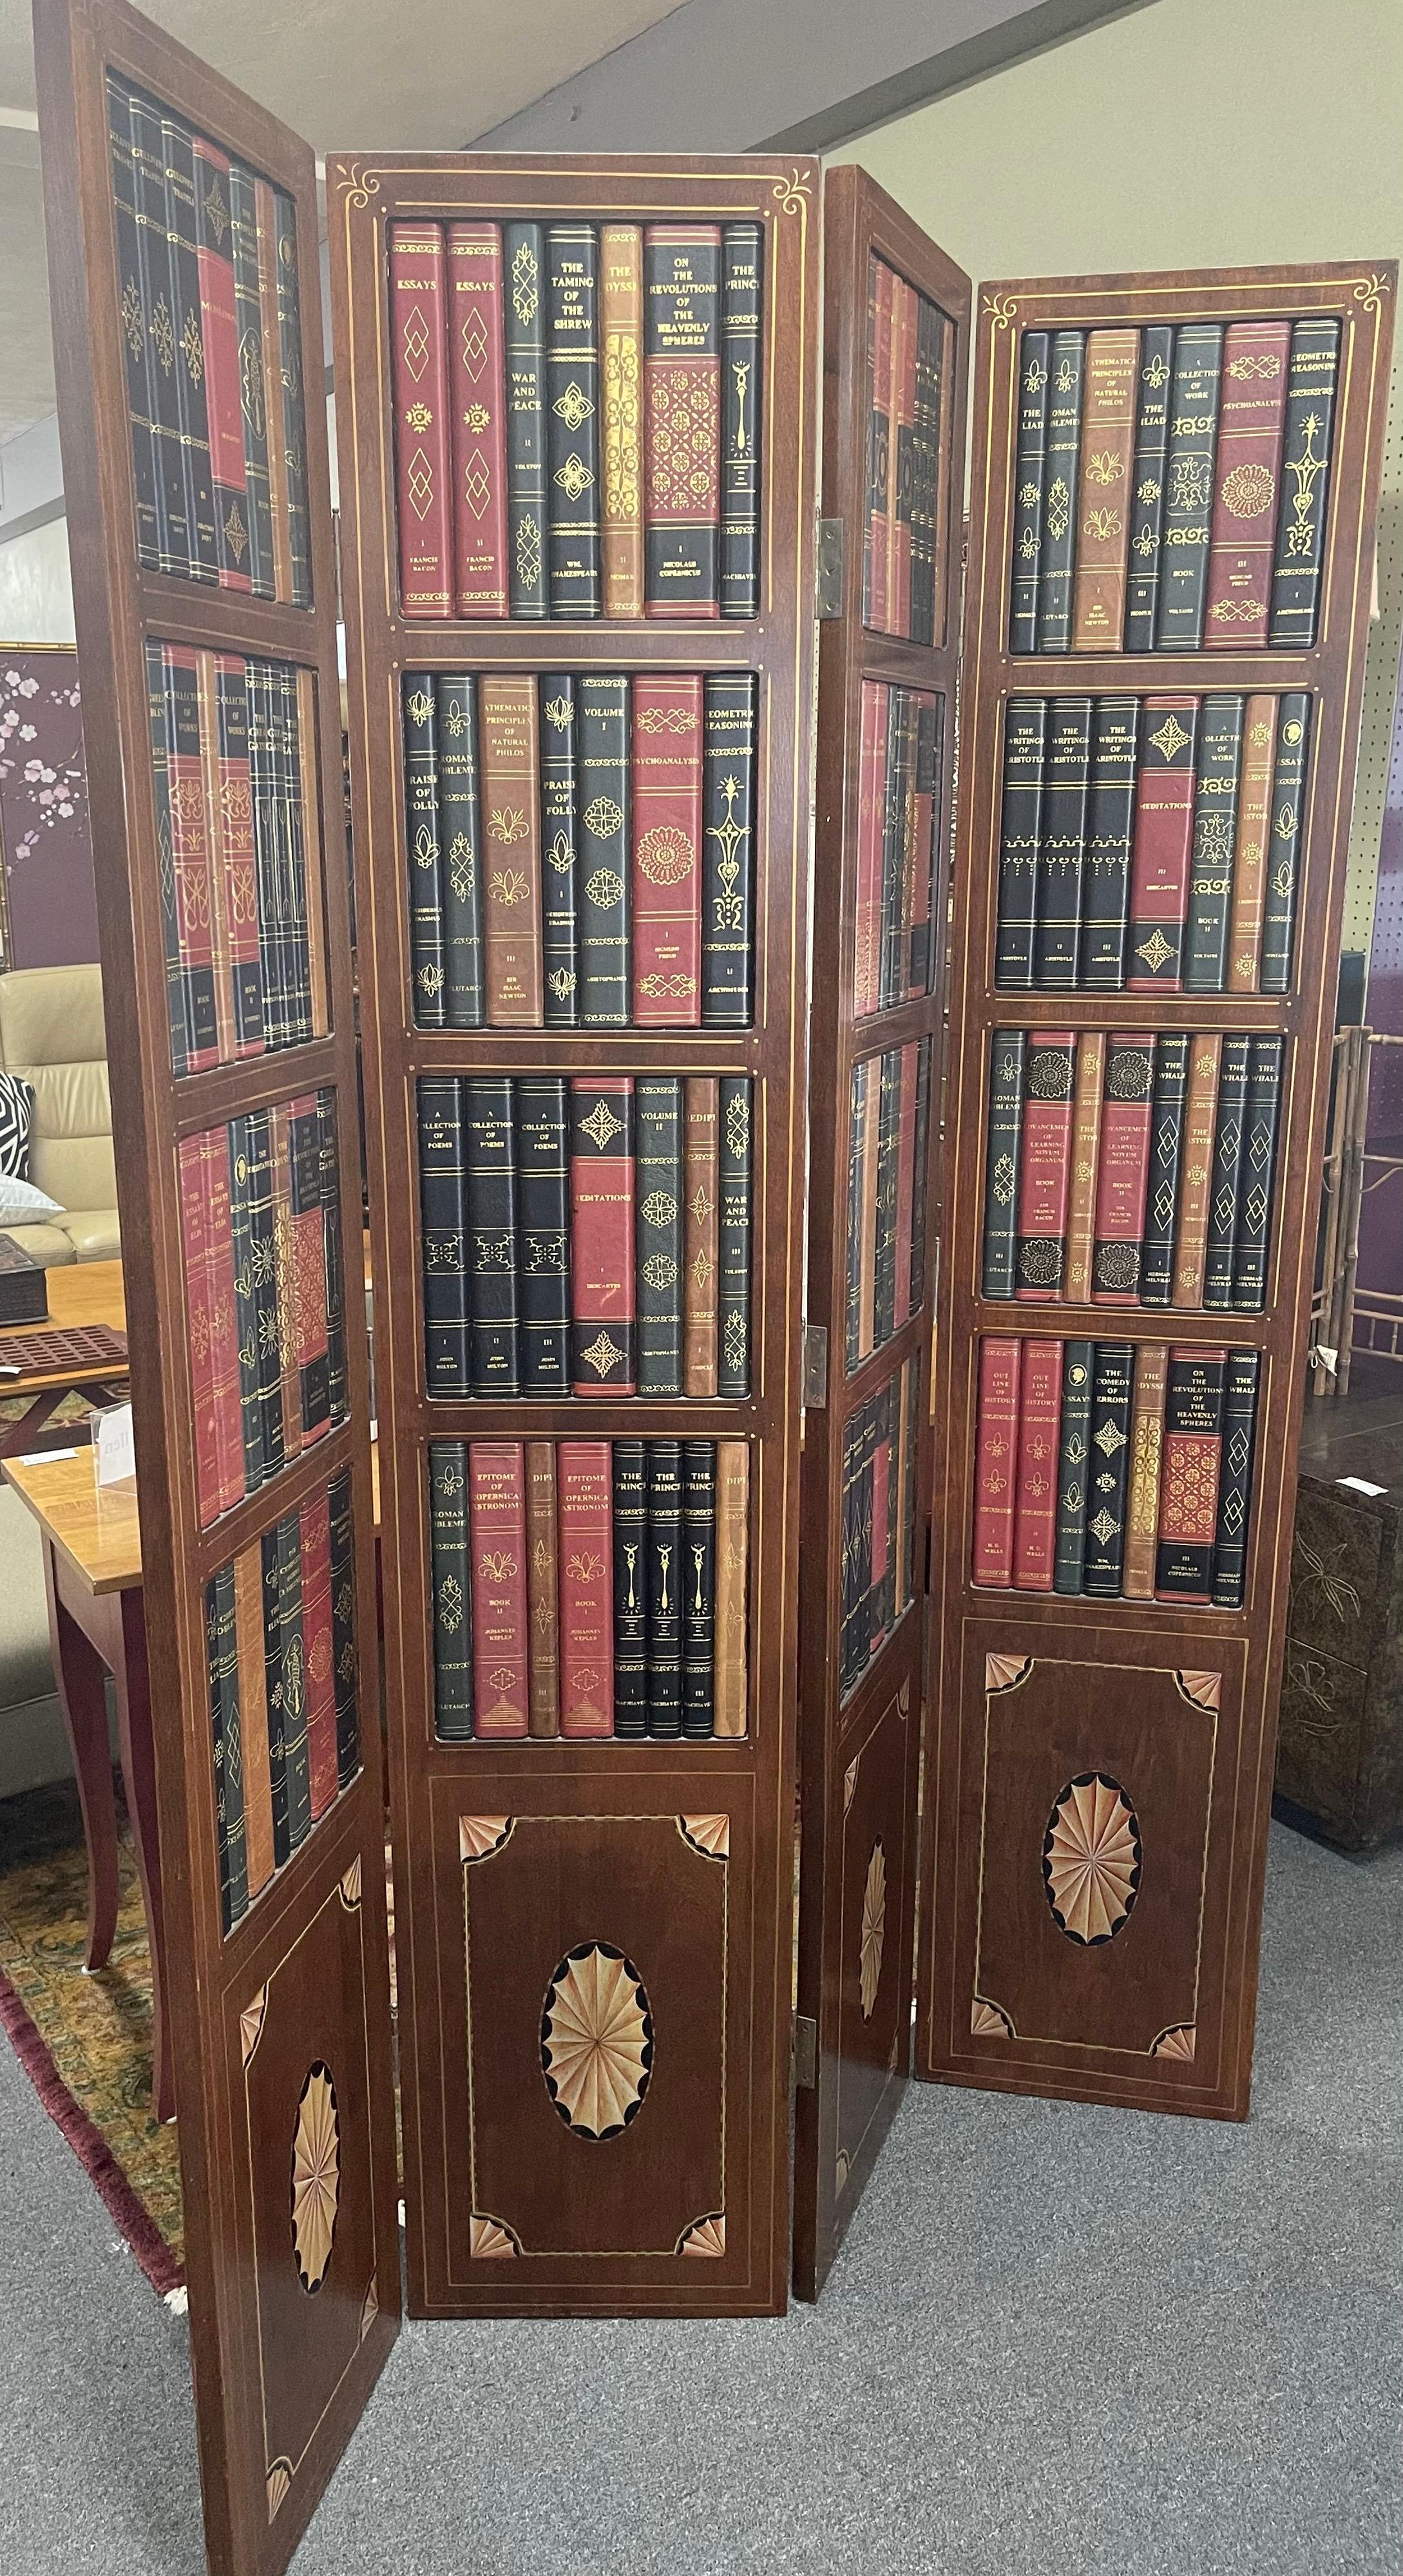 American Leather Bound Library Book Four-Panel Folding Screen by Maitland Smith